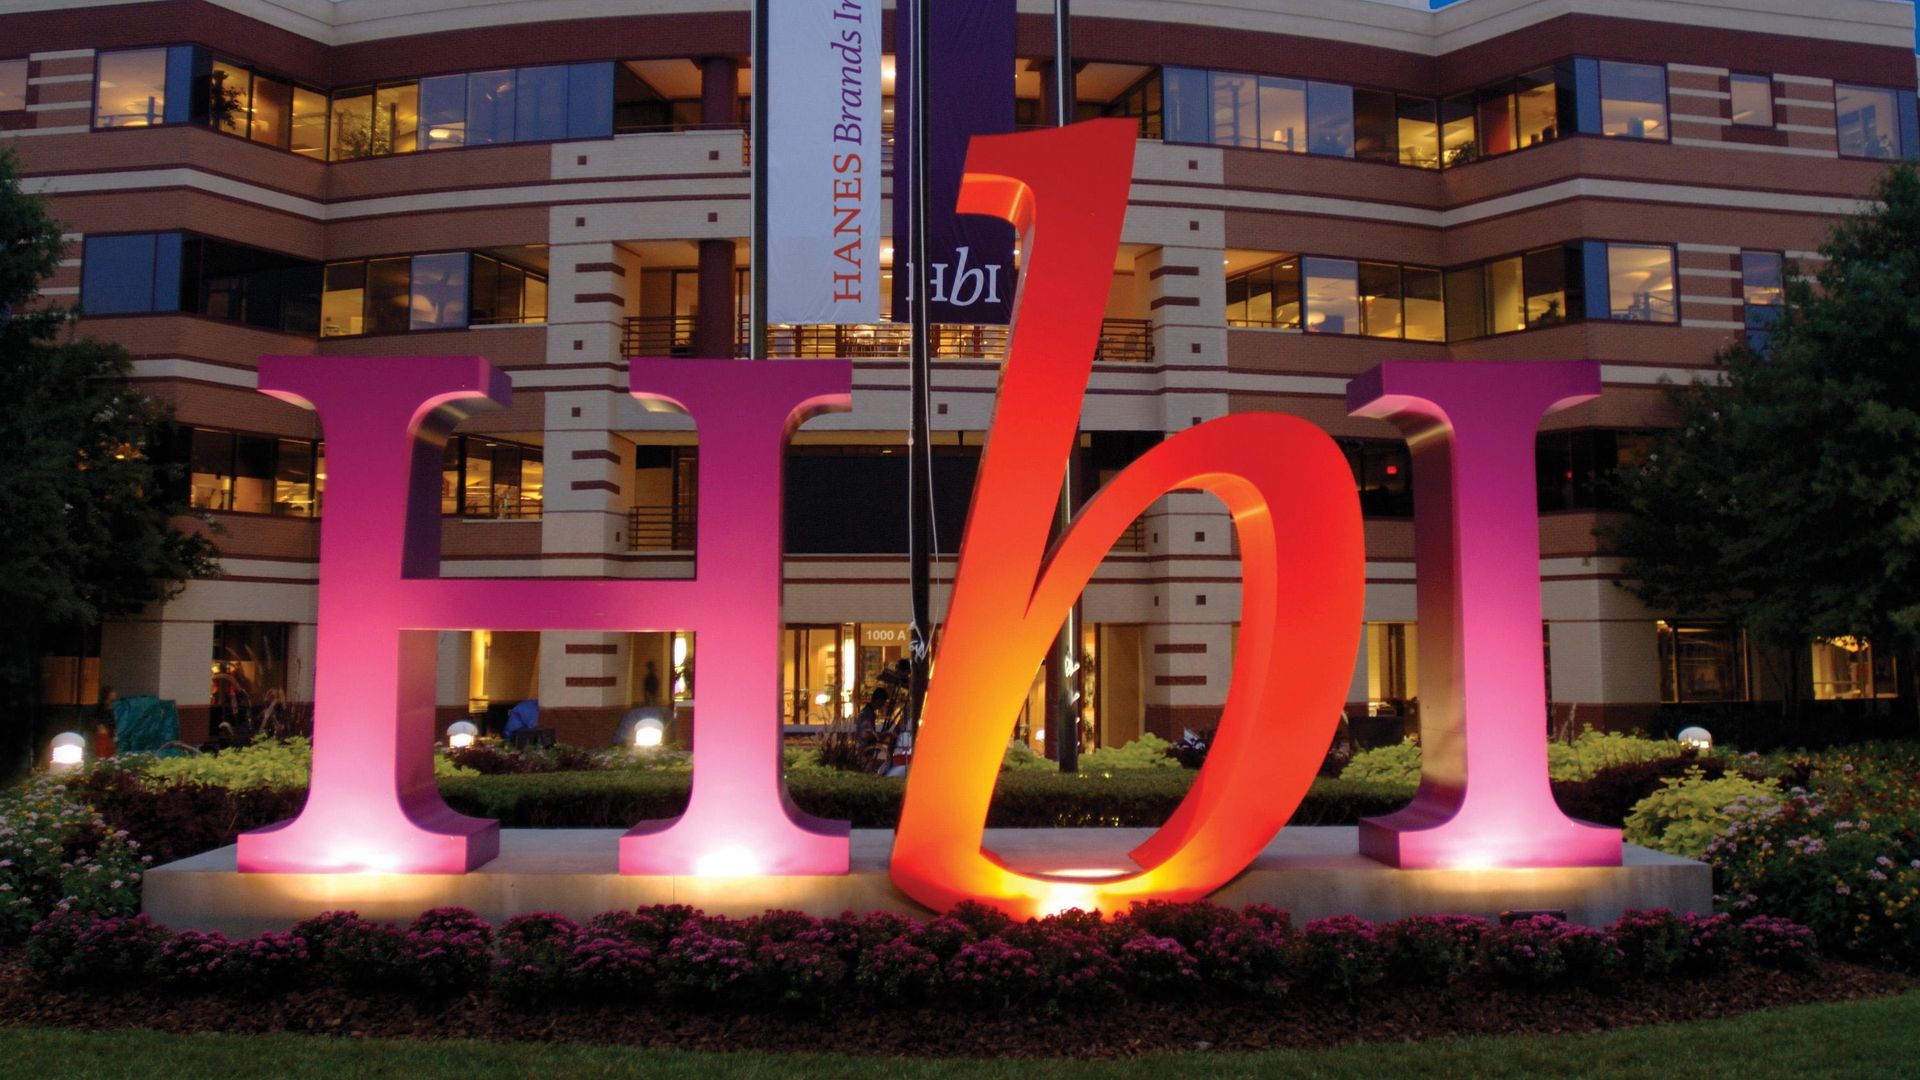 Giant letters h, b and i are illuminated in front of a corporate building